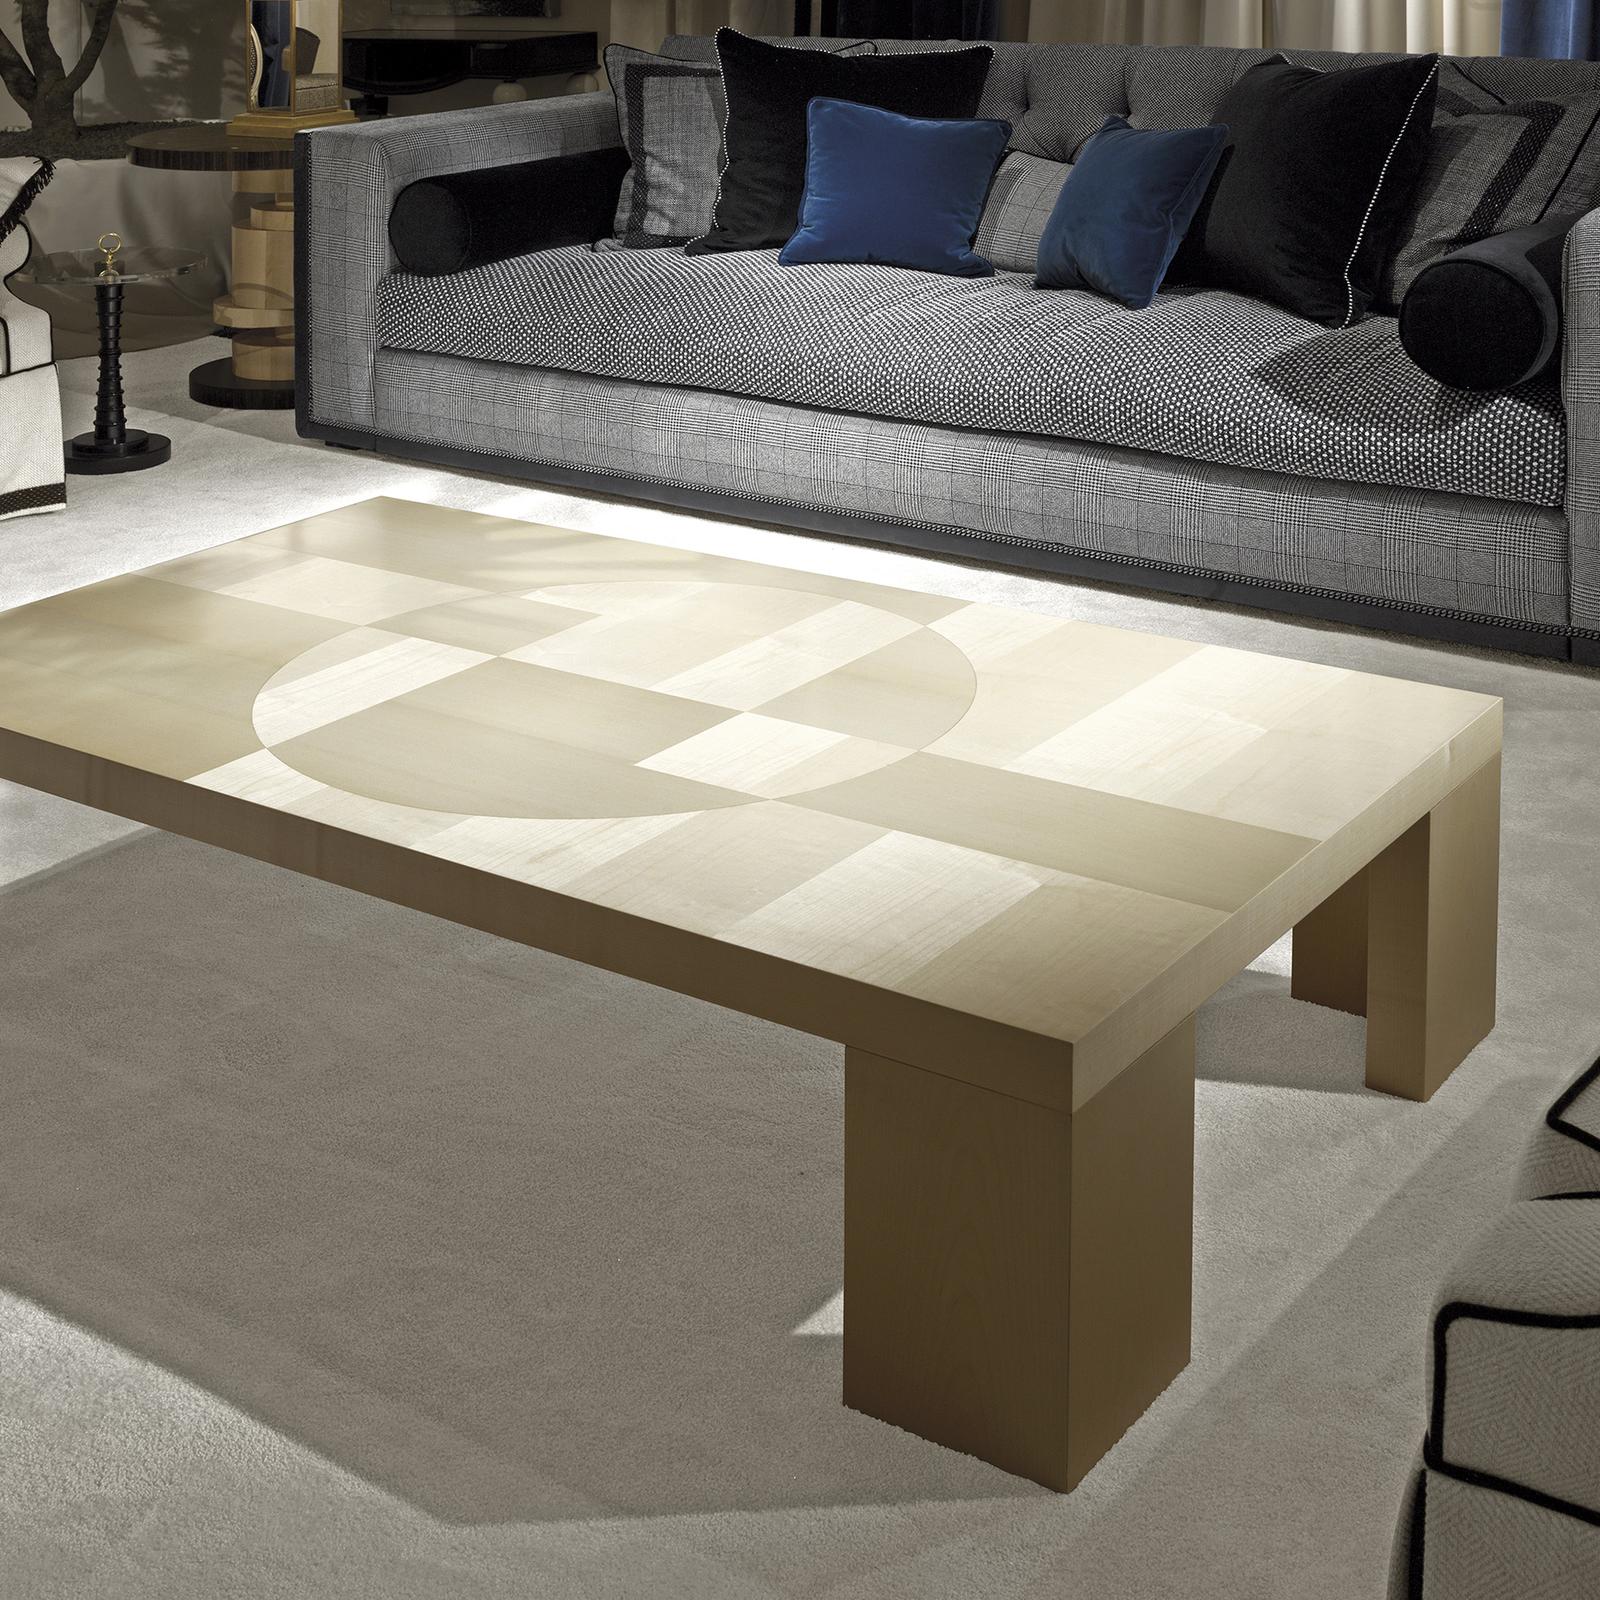 A celebration of pure geometry and sophisticated design, this coffee table is an elegant and timeless addition to any living room. Its simple, low profile is crafted entirely by hand of maple. The delicate honey hues of the wood are charming and add